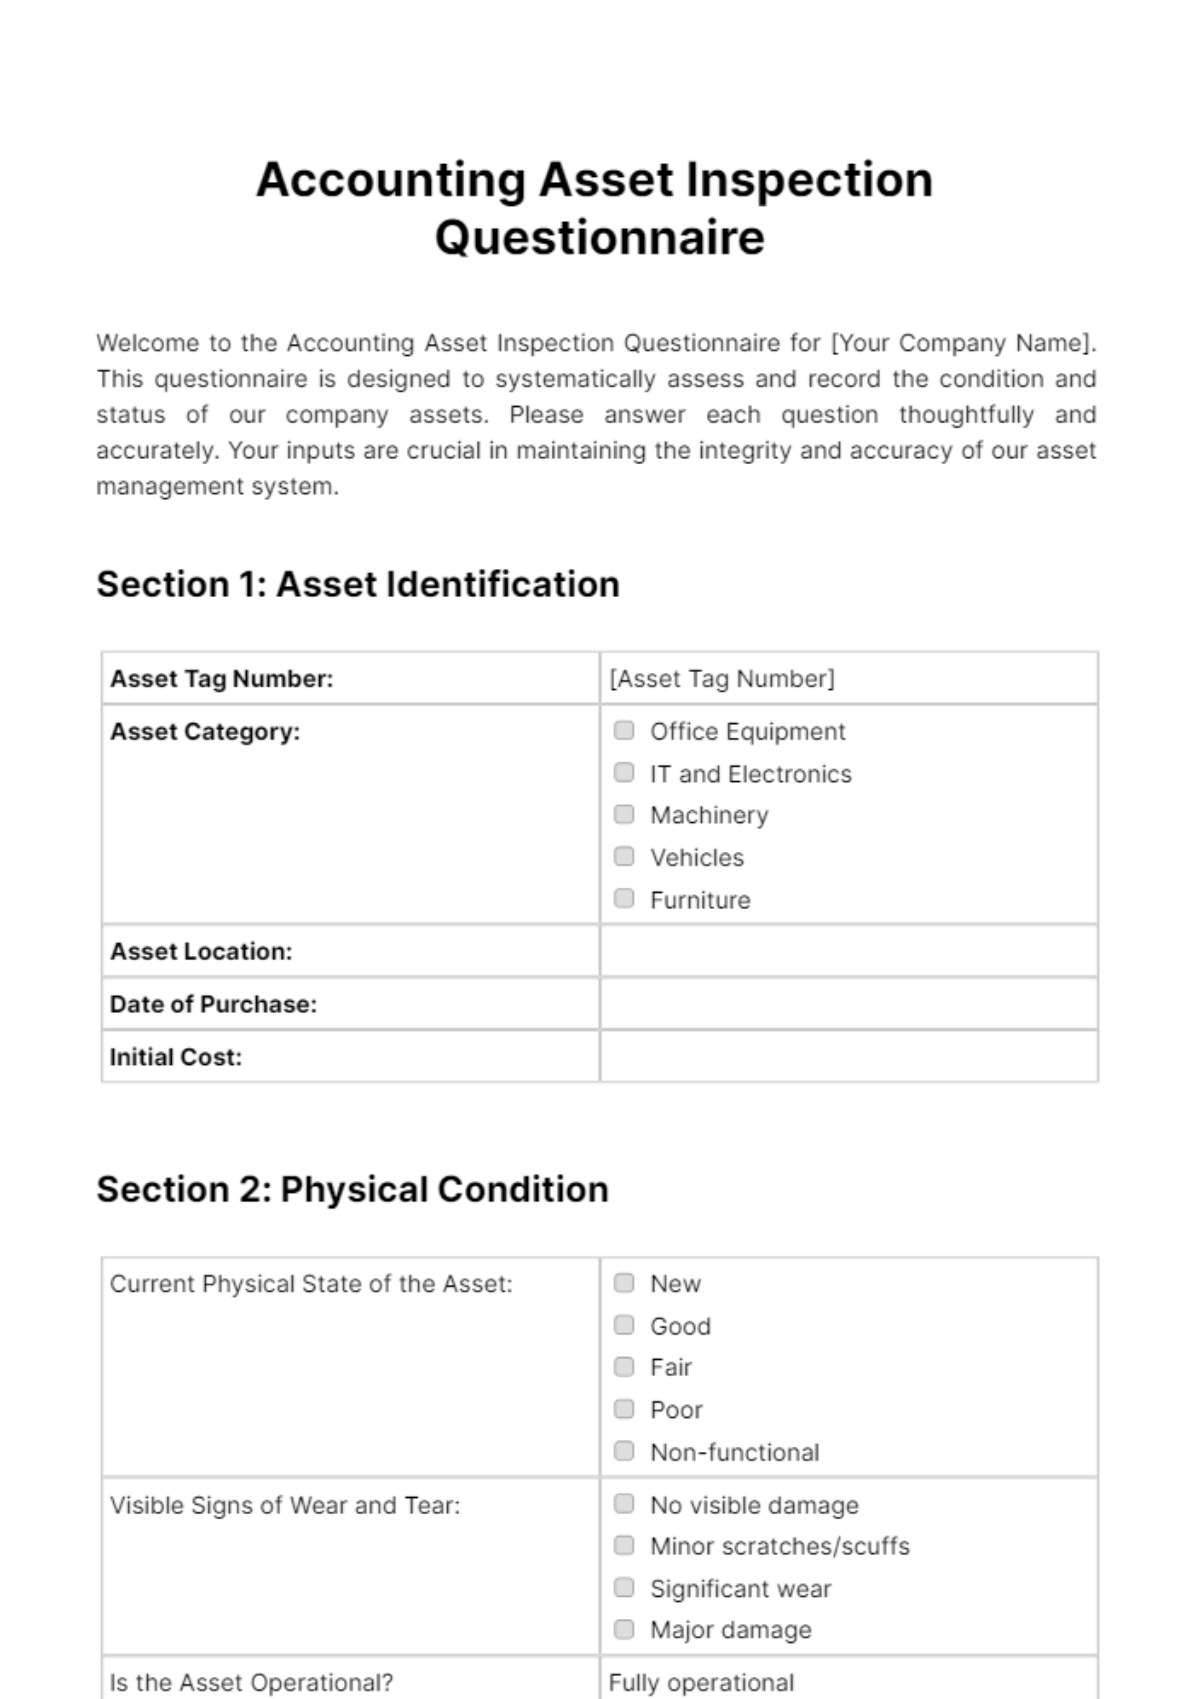 Free Accounting Asset Inspection Questionnaire Template